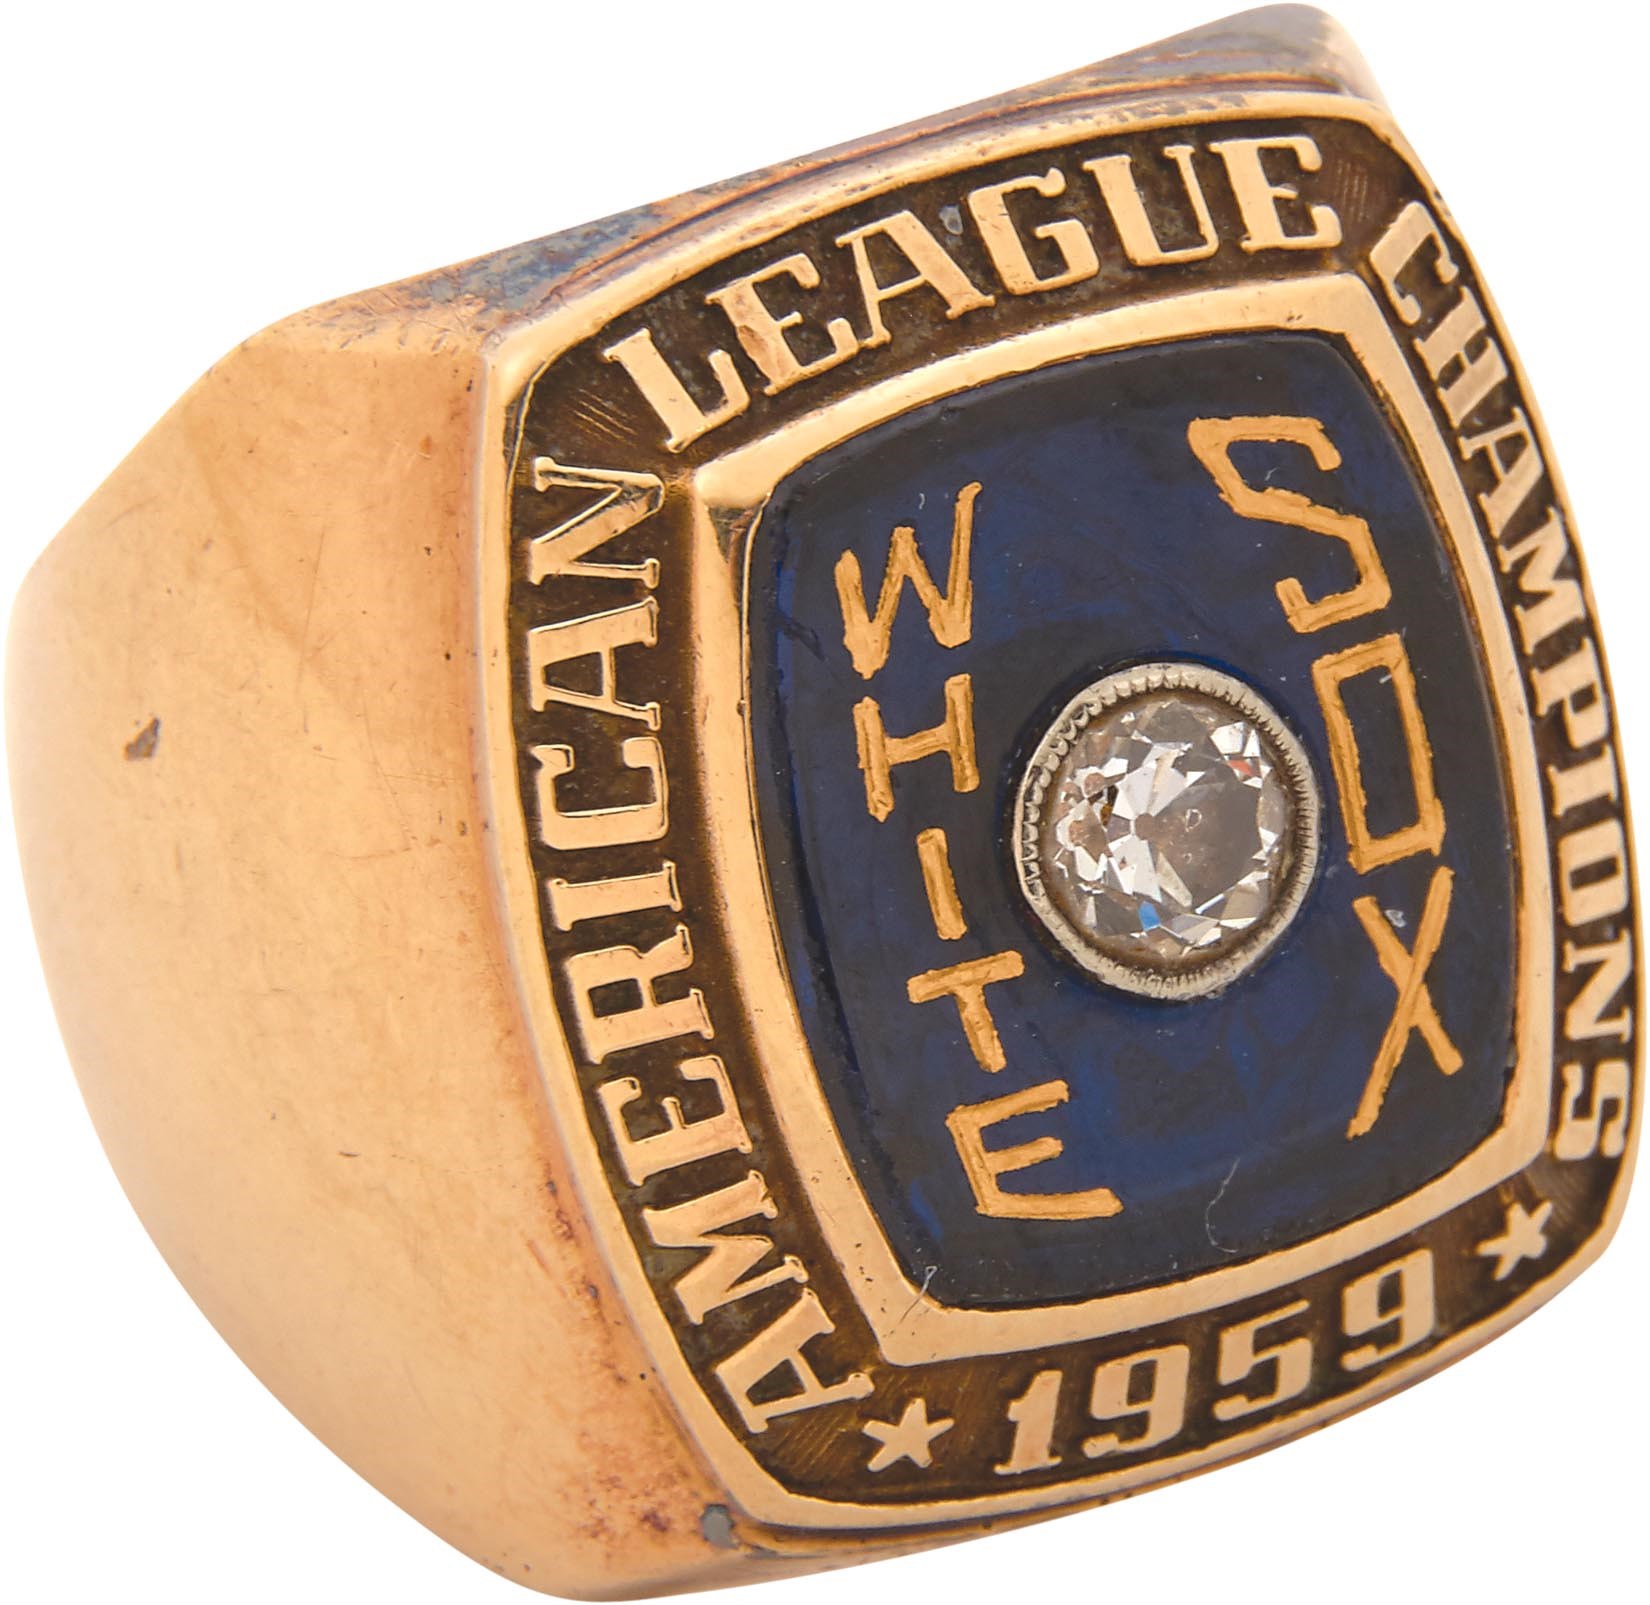 Sports Rings And Awards - Nellie Fox's 1959 Chicago White Sox American League Championship Ring (Fox Family Letter)